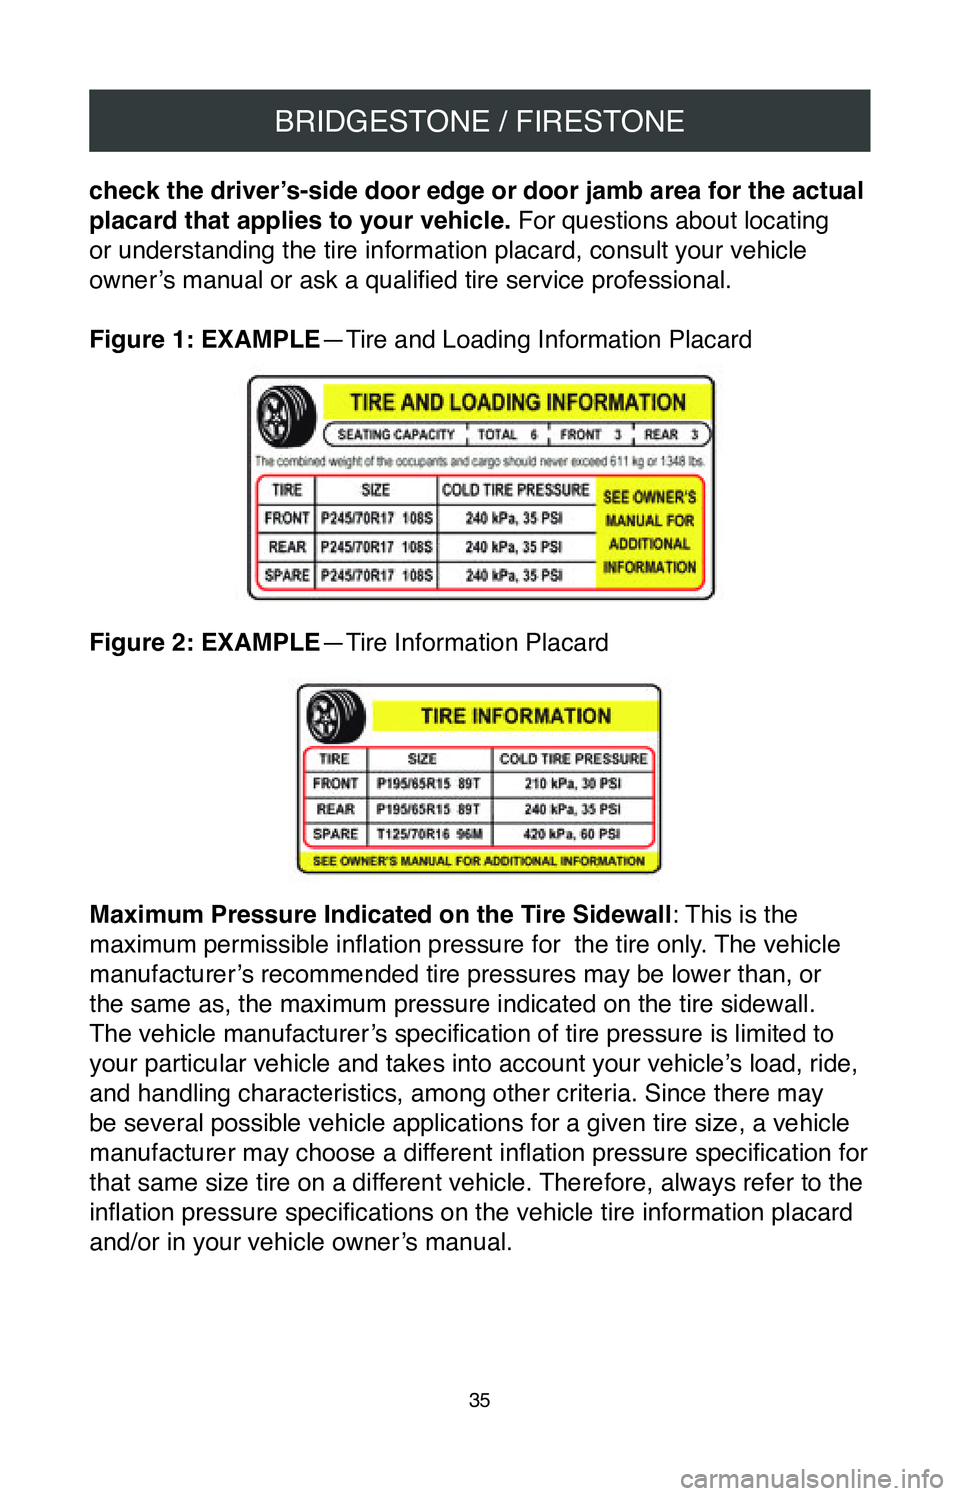 TOYOTA CAMRY 2020  Warranties & Maintenance Guides (in English) BRIDGESTONE / FIRESTONE
35
check the driver’s-side door edge or door jamb area for the actual 
placard that applies to your vehicle. For questions about locating 
or understanding the tire informati